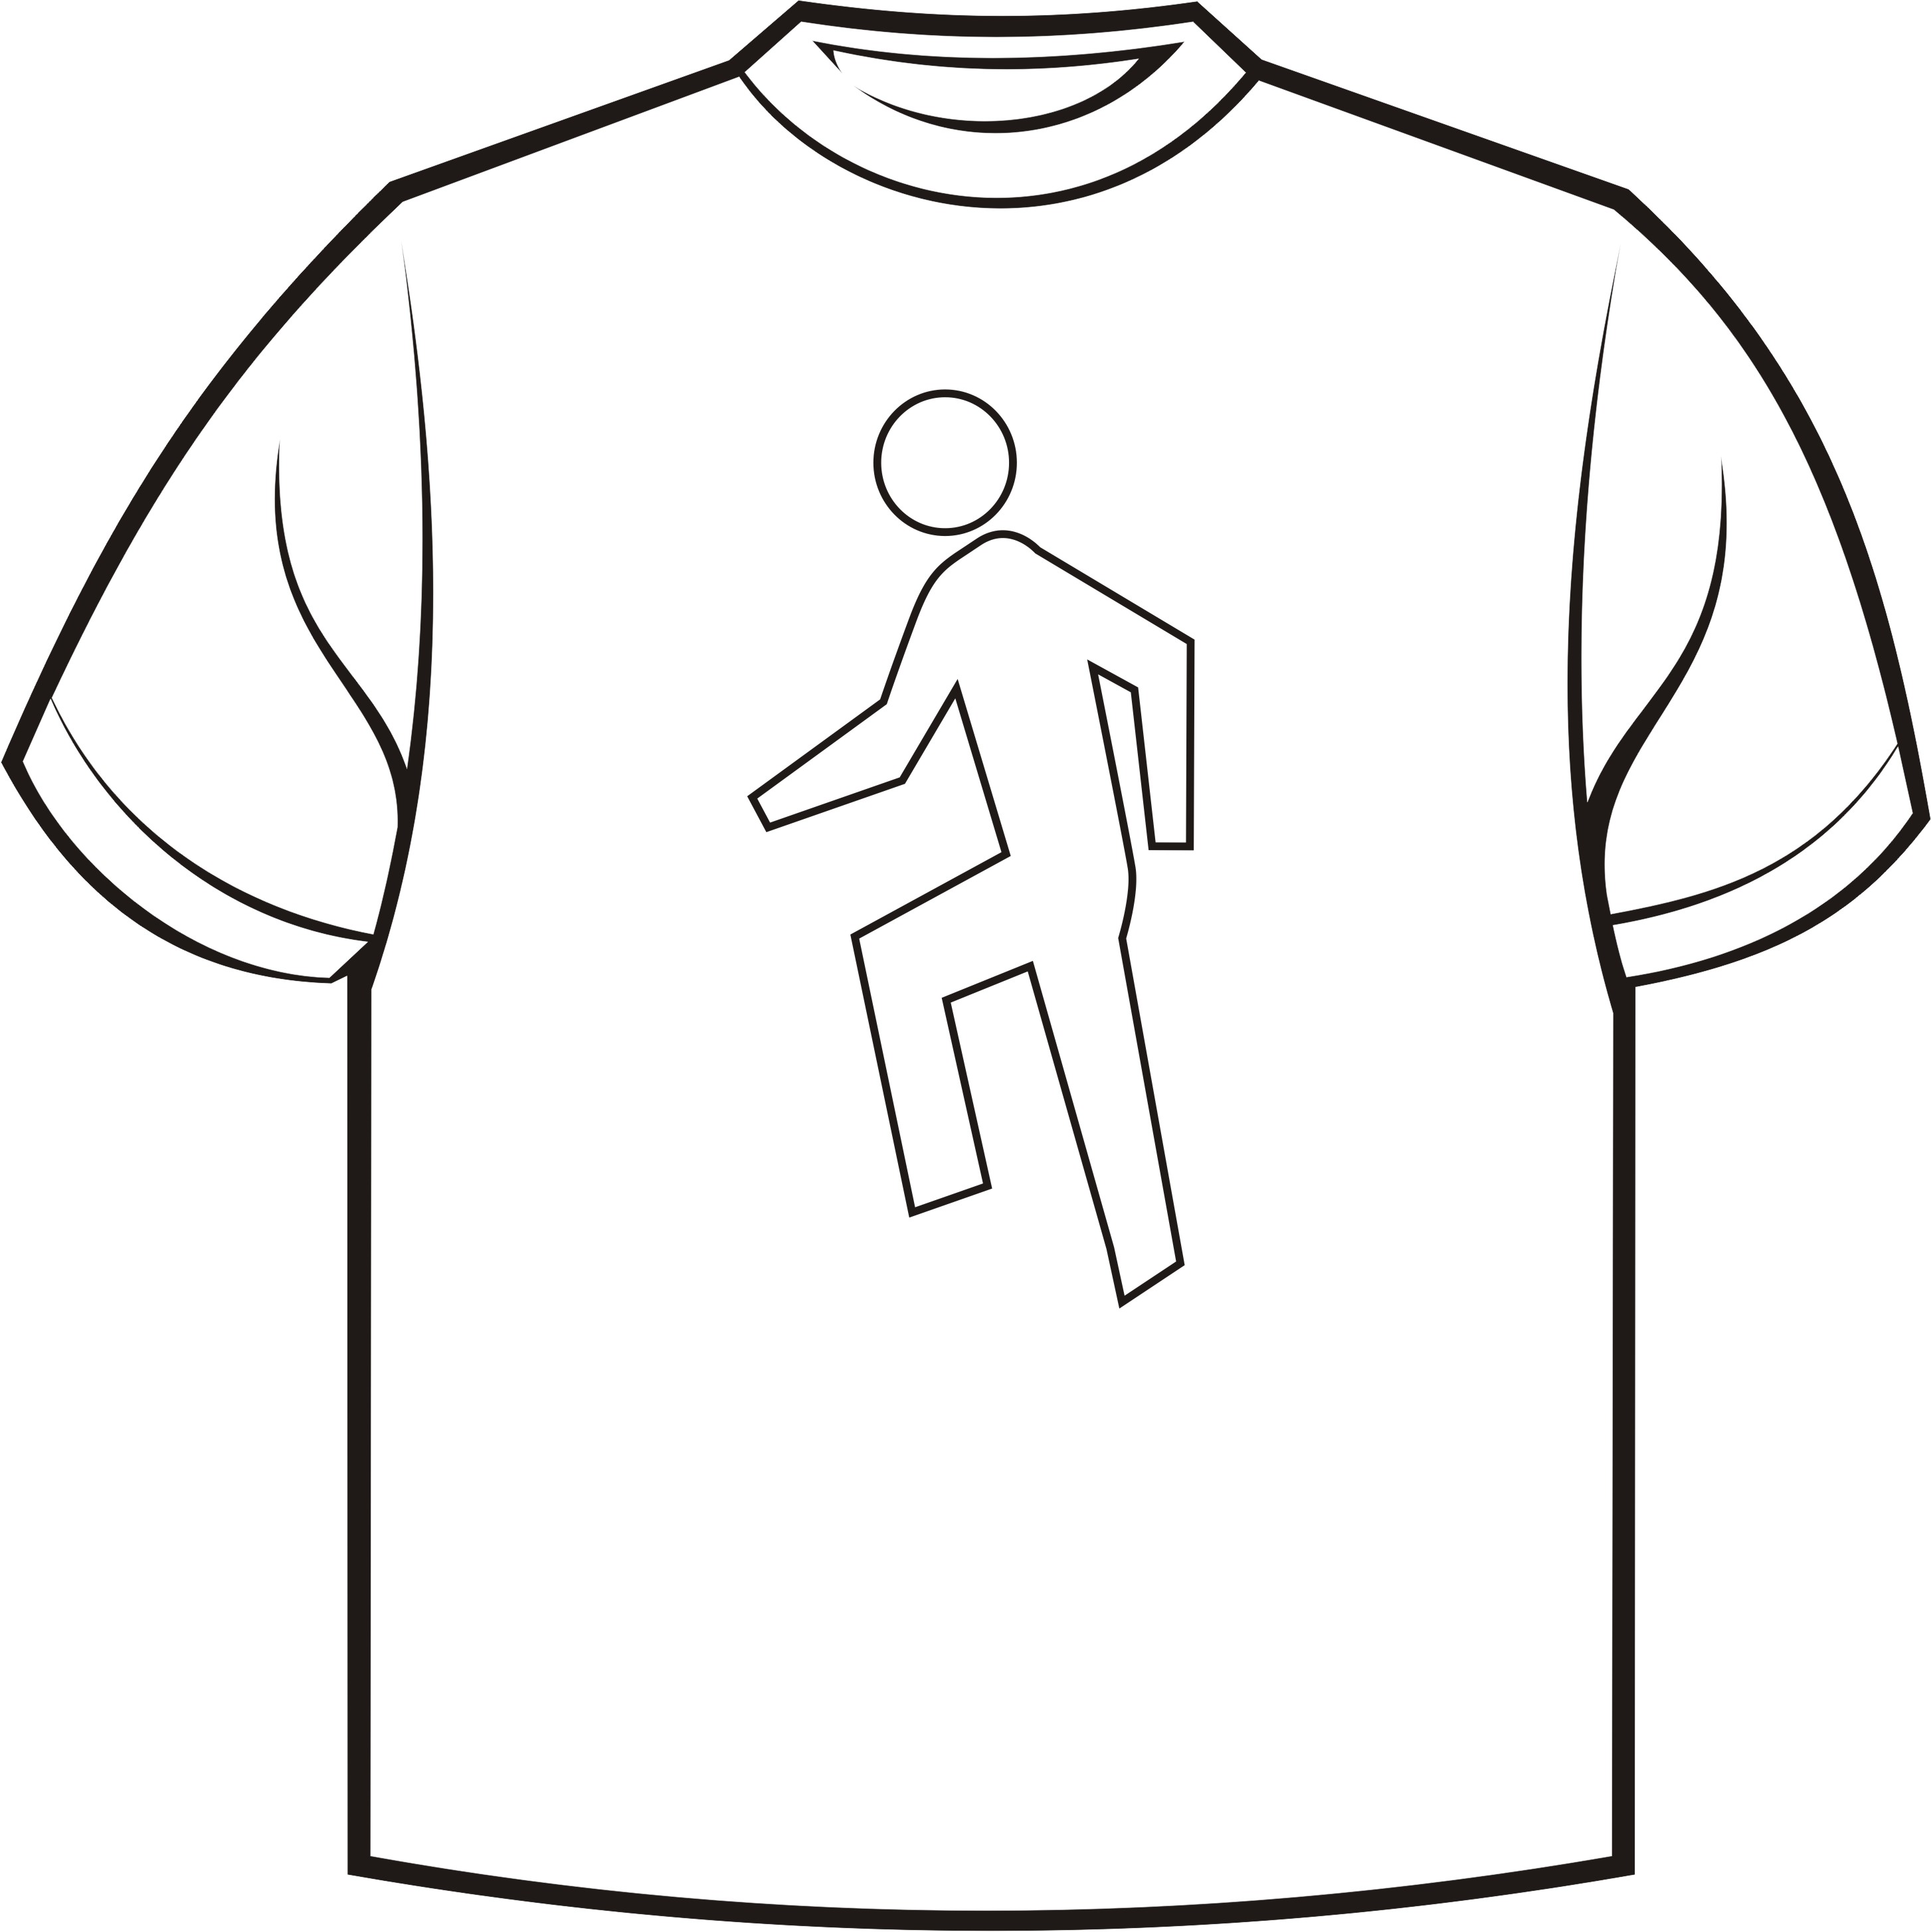 Image Of T-shirt Outline - ClipArt Best